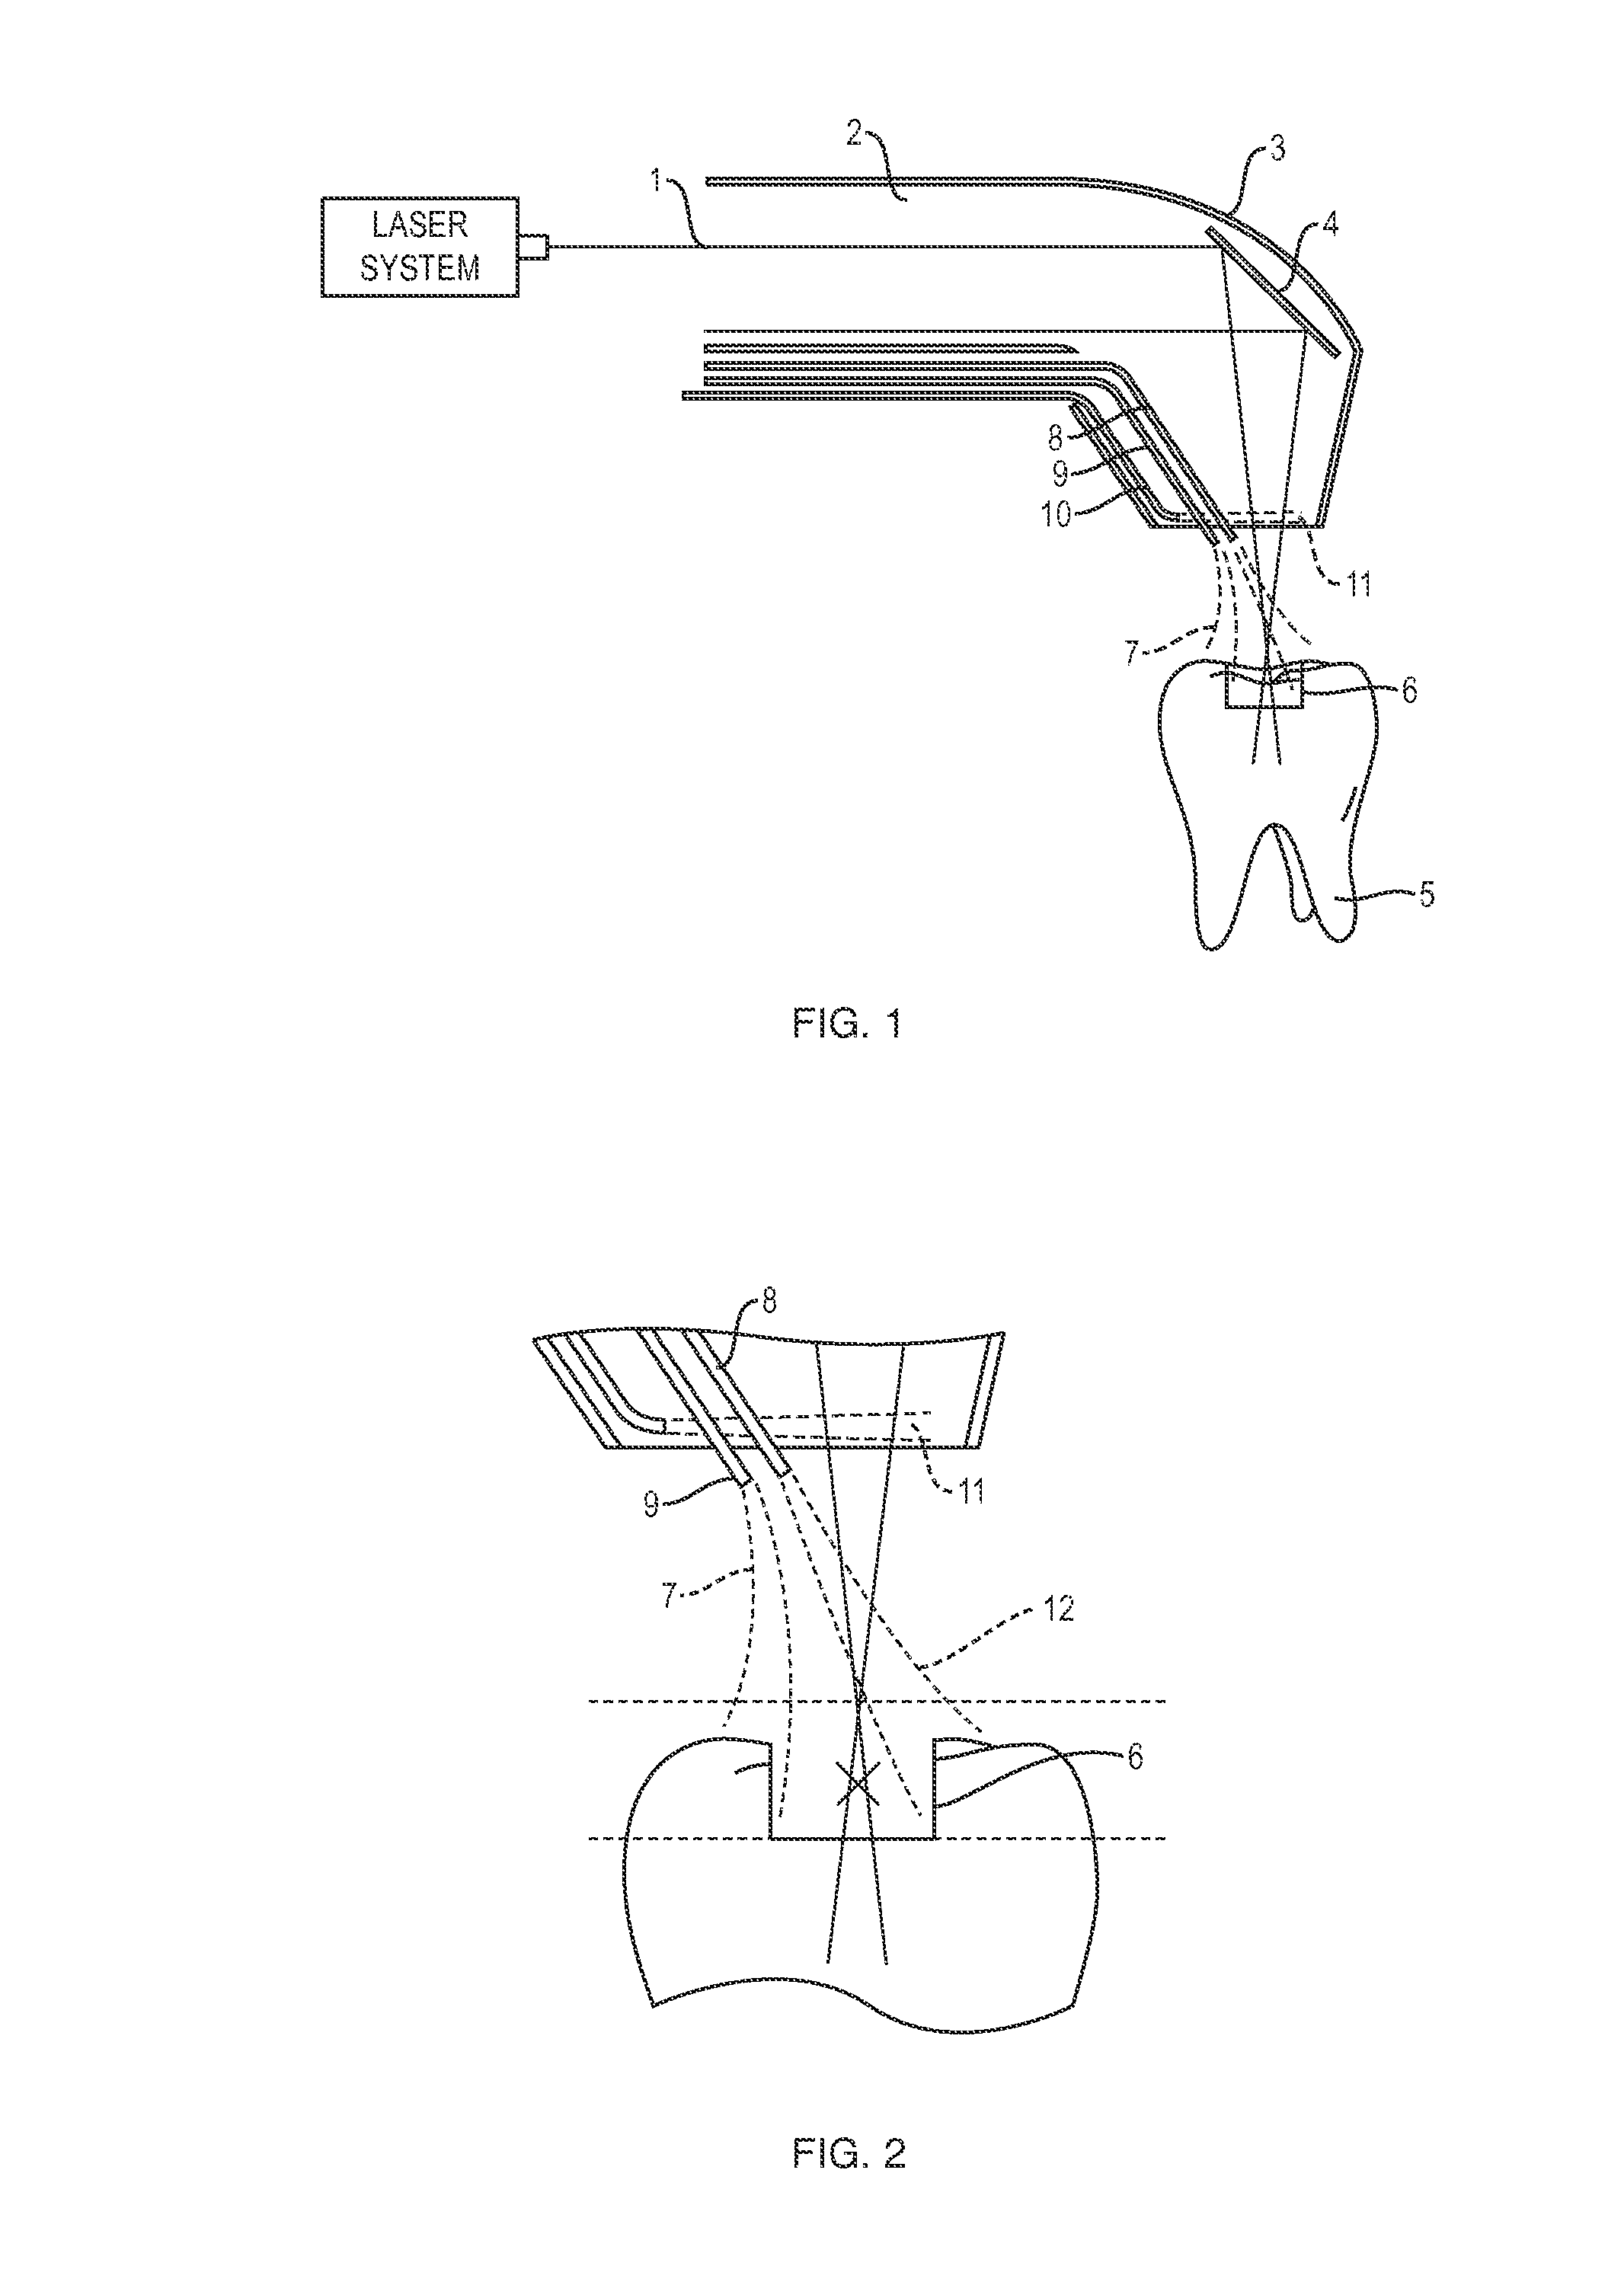 Apparatus and method for controlled fluid cooling during laser based dental treatments